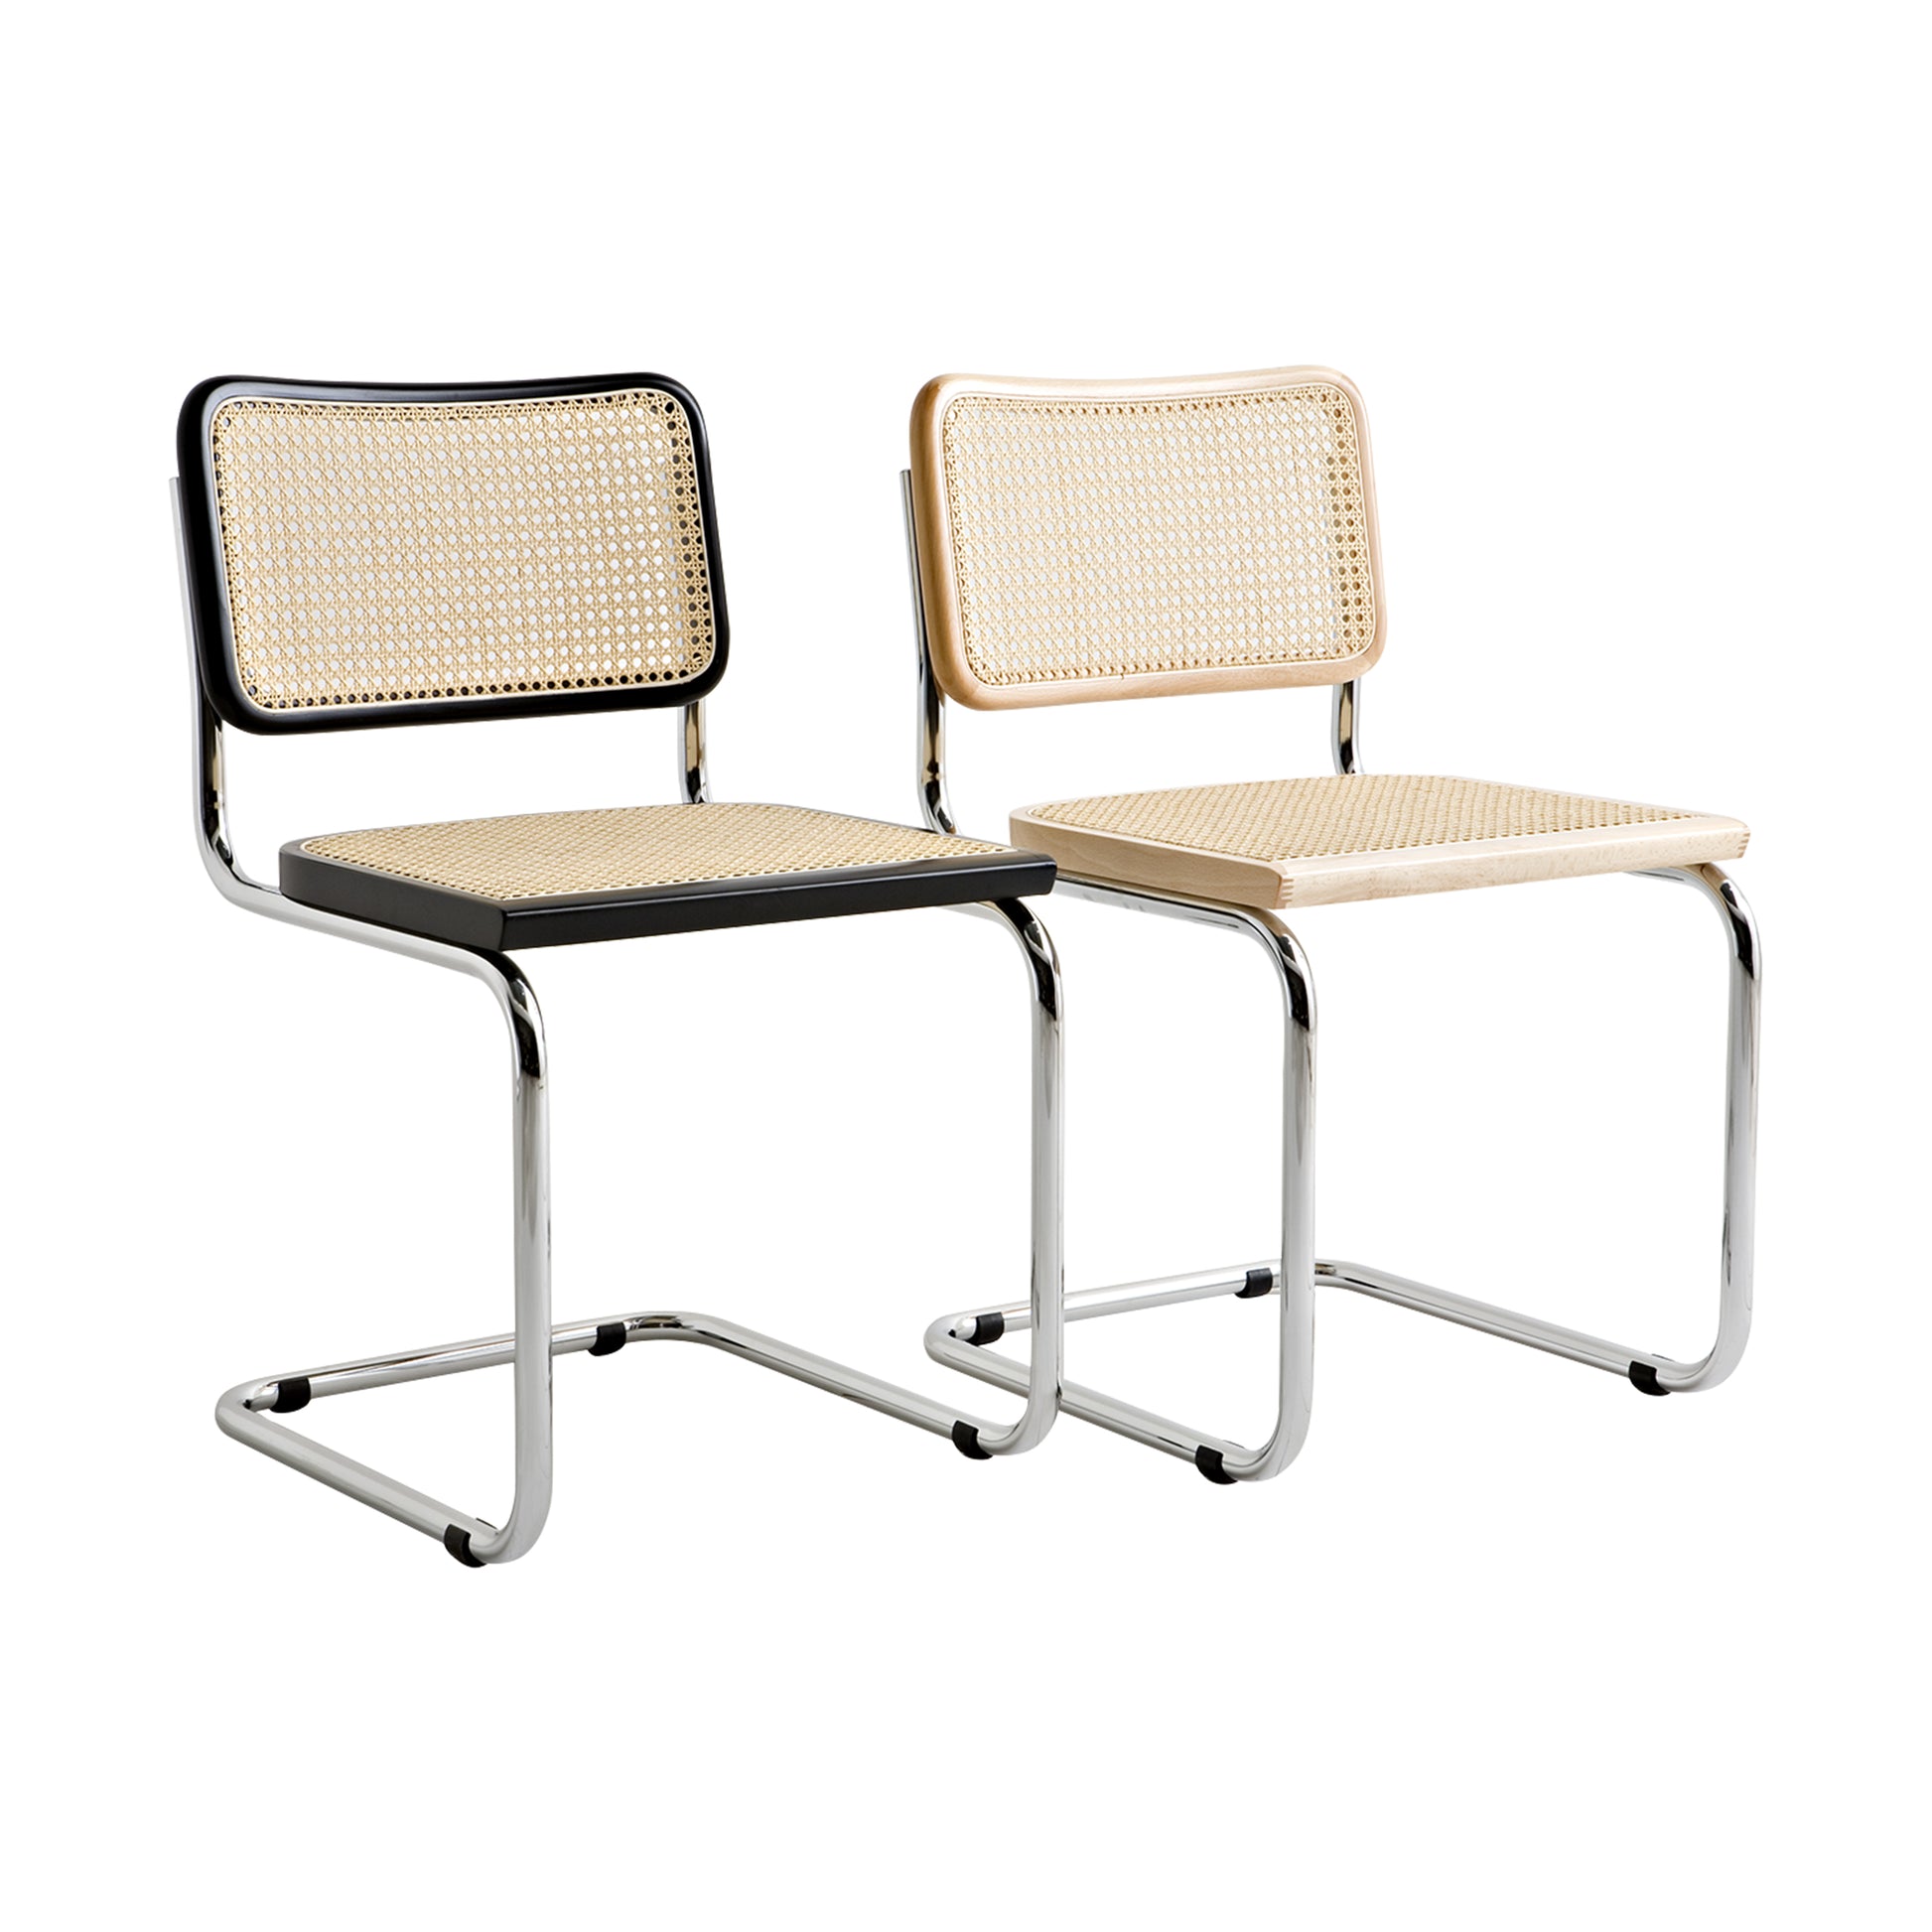 Chair cesca style |  White lacquered wood | Black lacquered wood